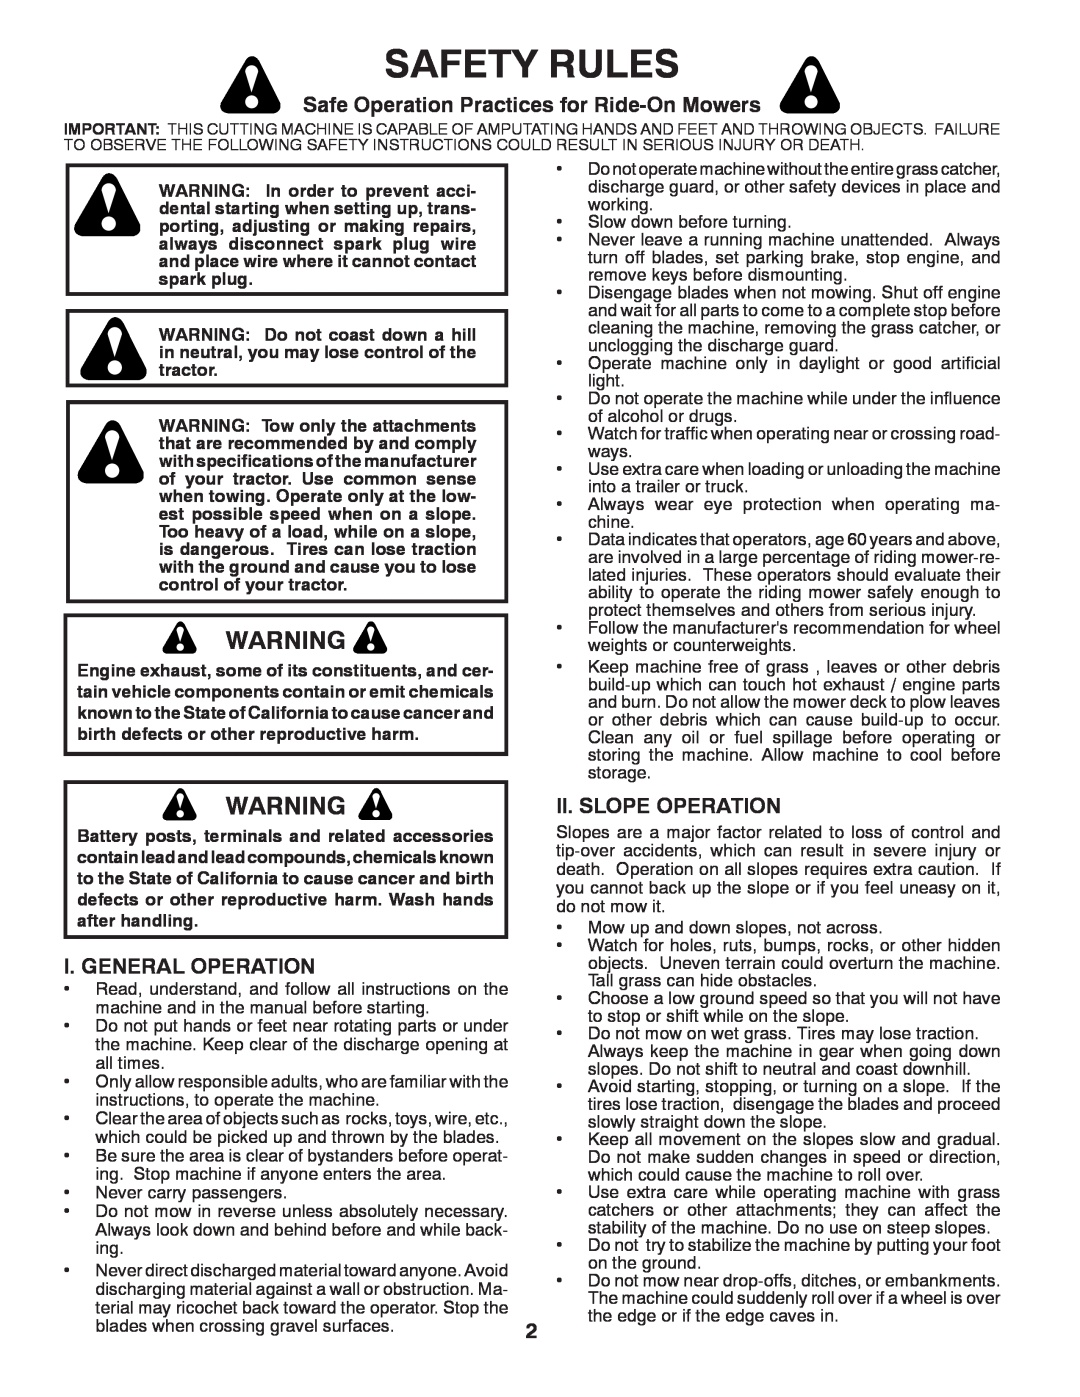 Murray MX17542LT Safety Rules, Safe Operation Practices for Ride-On Mowers, I. General Operation, Ii. Slope Operation 